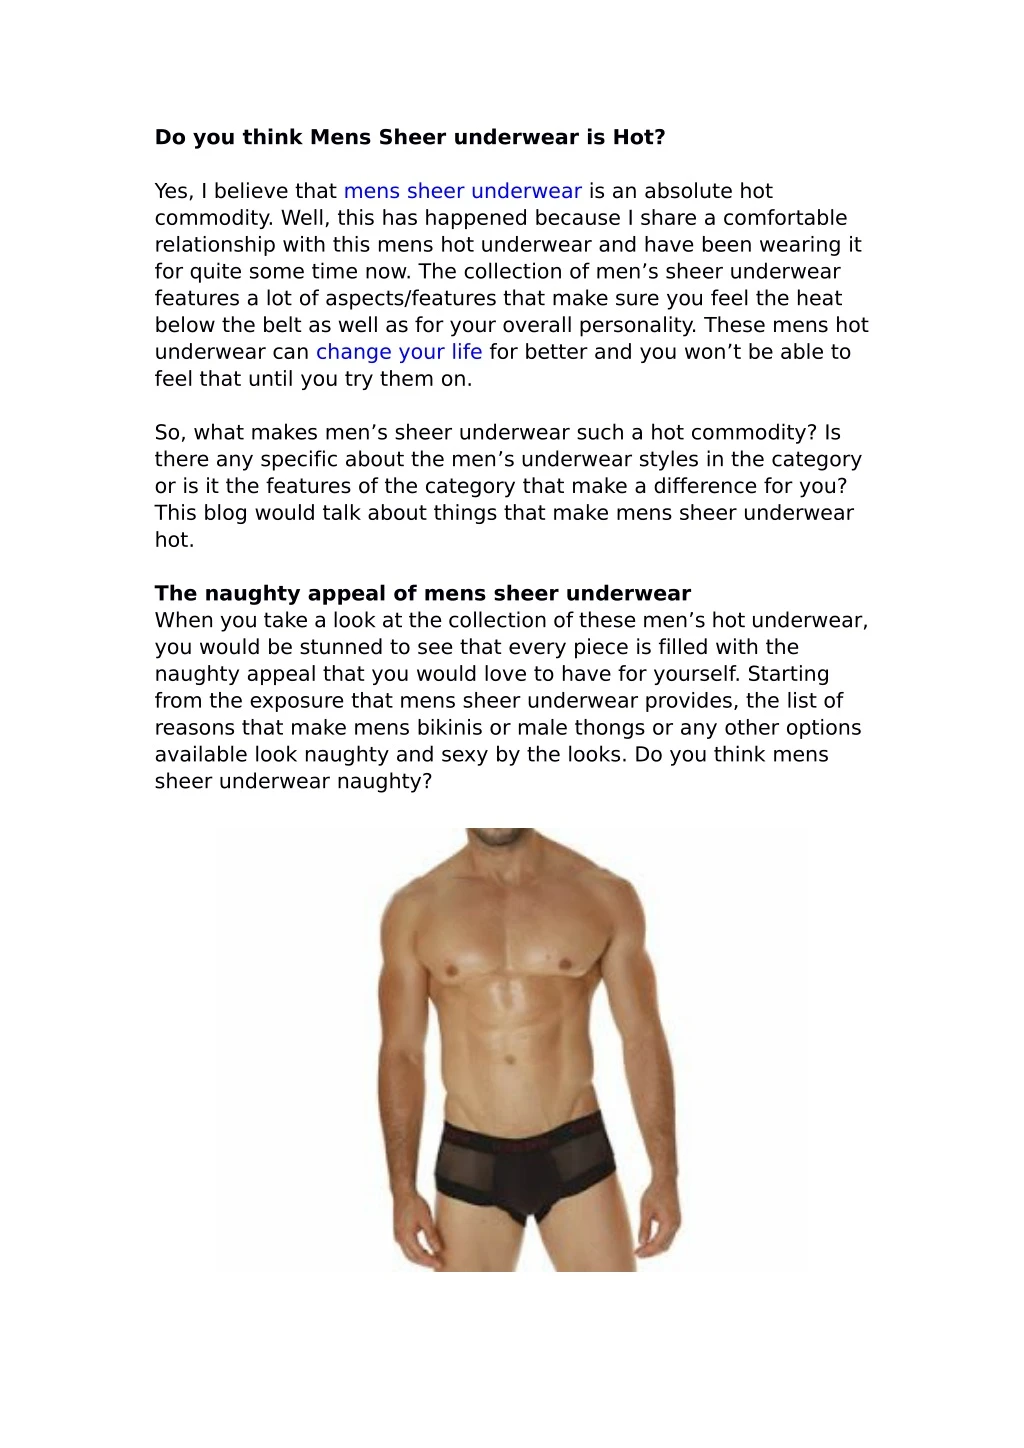 do you think mens sheer underwear is hot